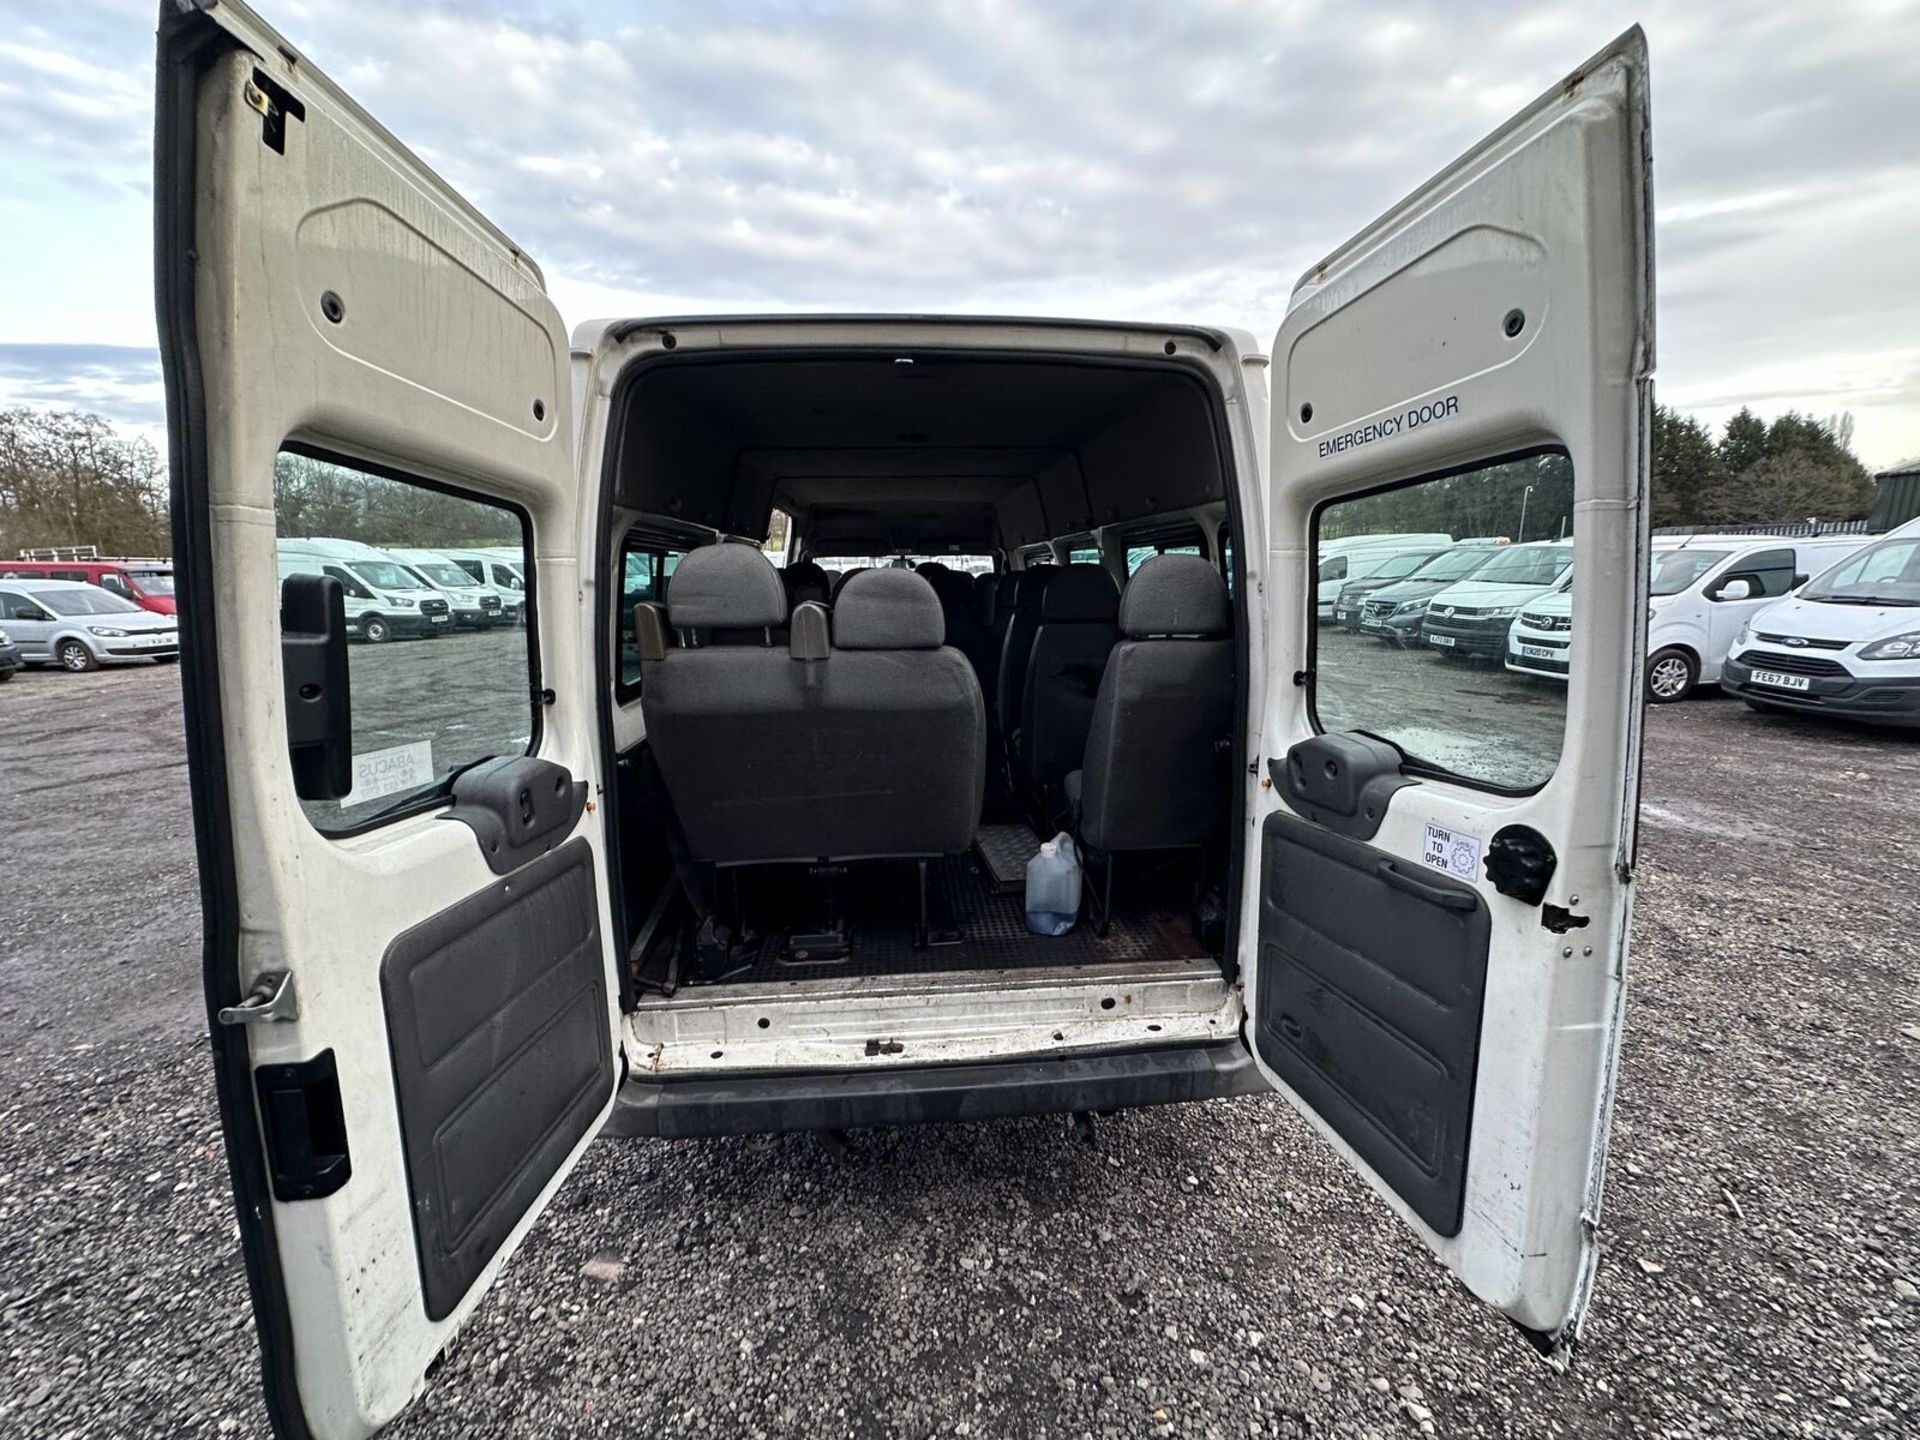 2005 FORD TRANSIT MINIBUS - READY FOR ADVENTURE >>--NO VAT ON HAMMER--<< - Image 2 of 19